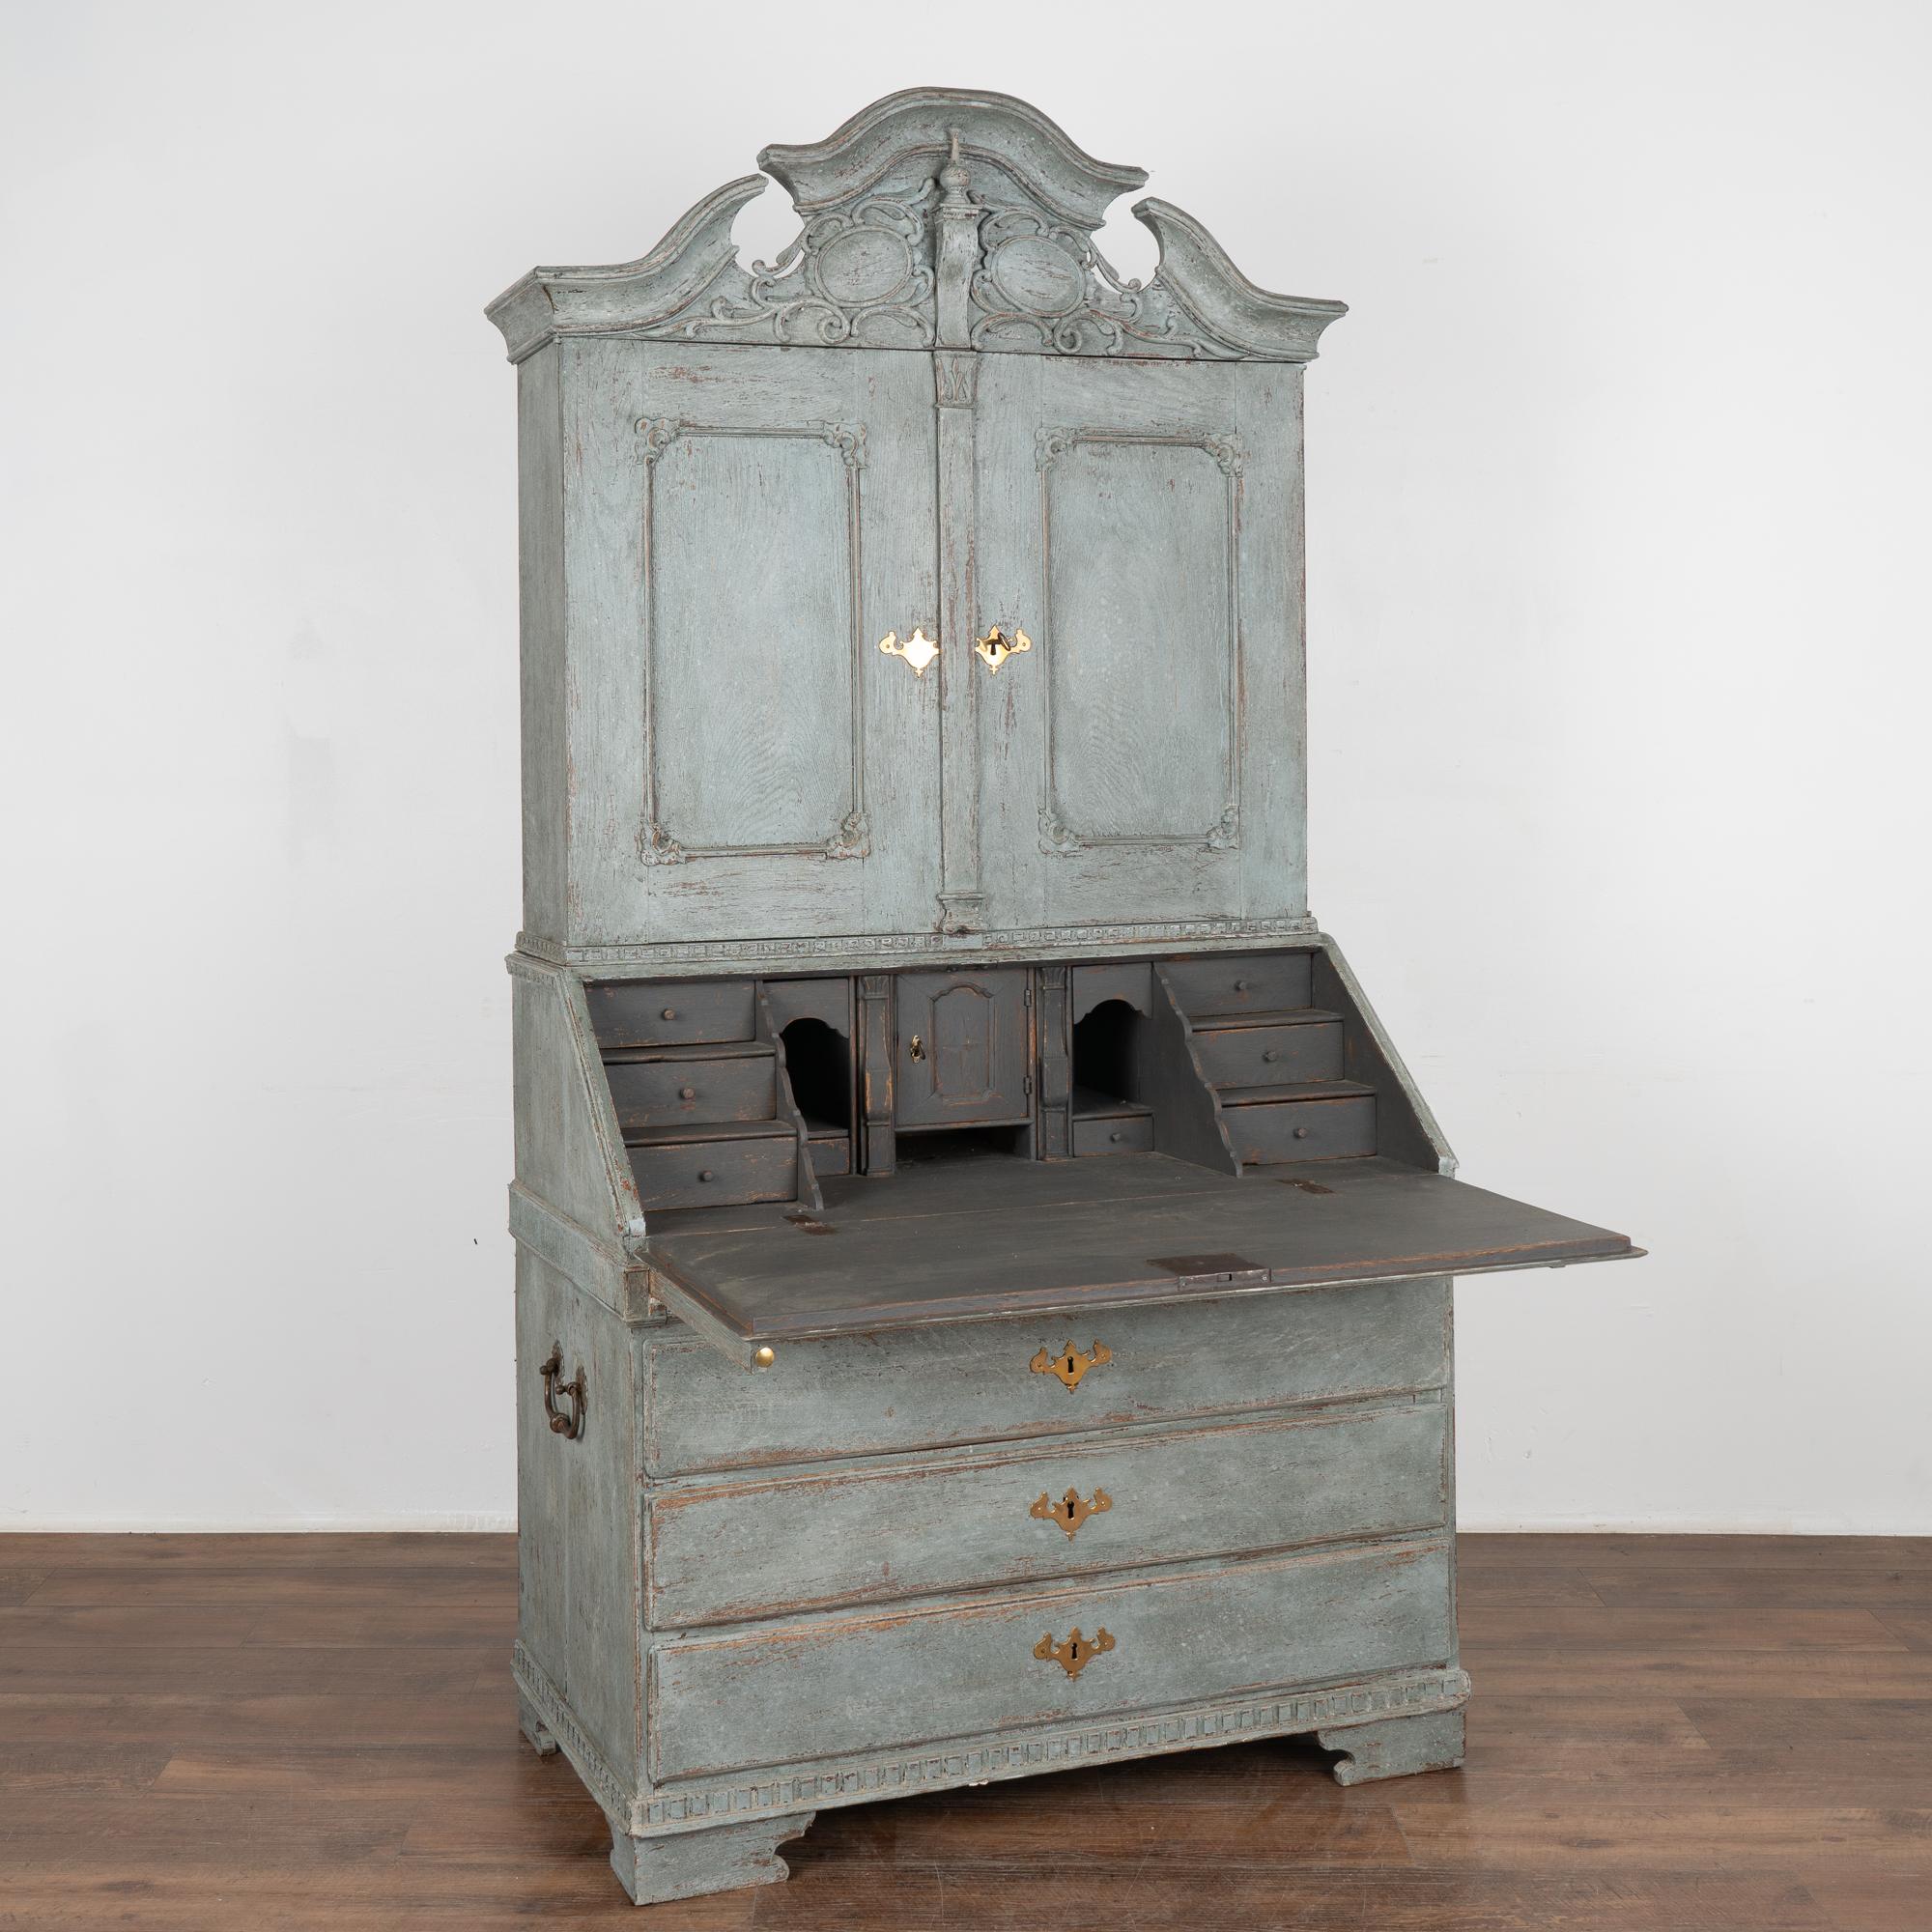 This striking oak secretary is an elegant statement piece crowned with an elaborate carved pediment.
The entire secretary has been given a professional custom layered blue painted finish which has been gently distressed to reveal the original oak